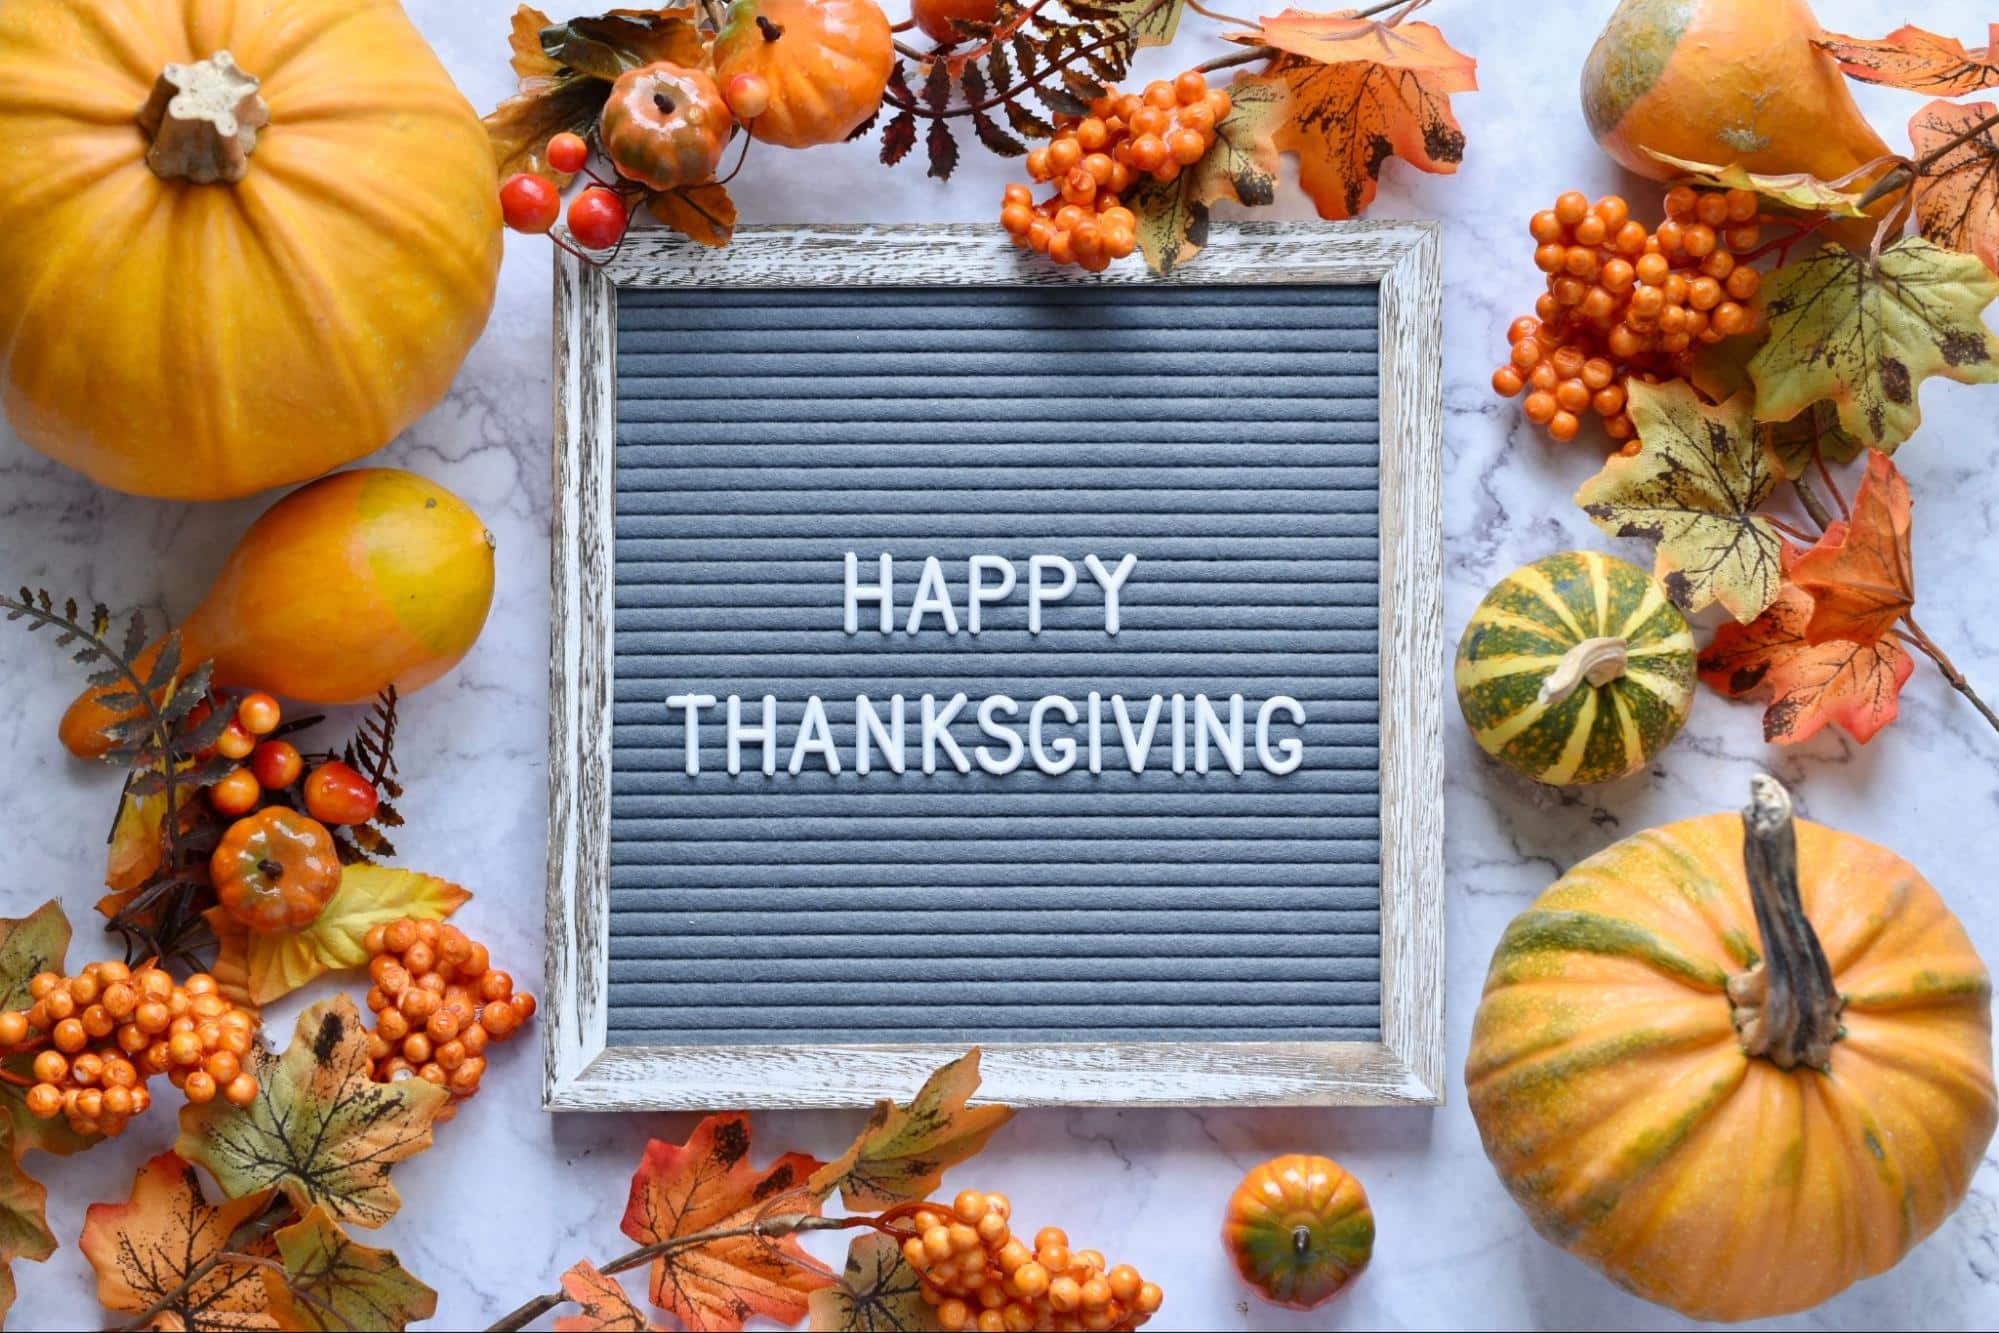 Happy Thanksgiving and Thank you!